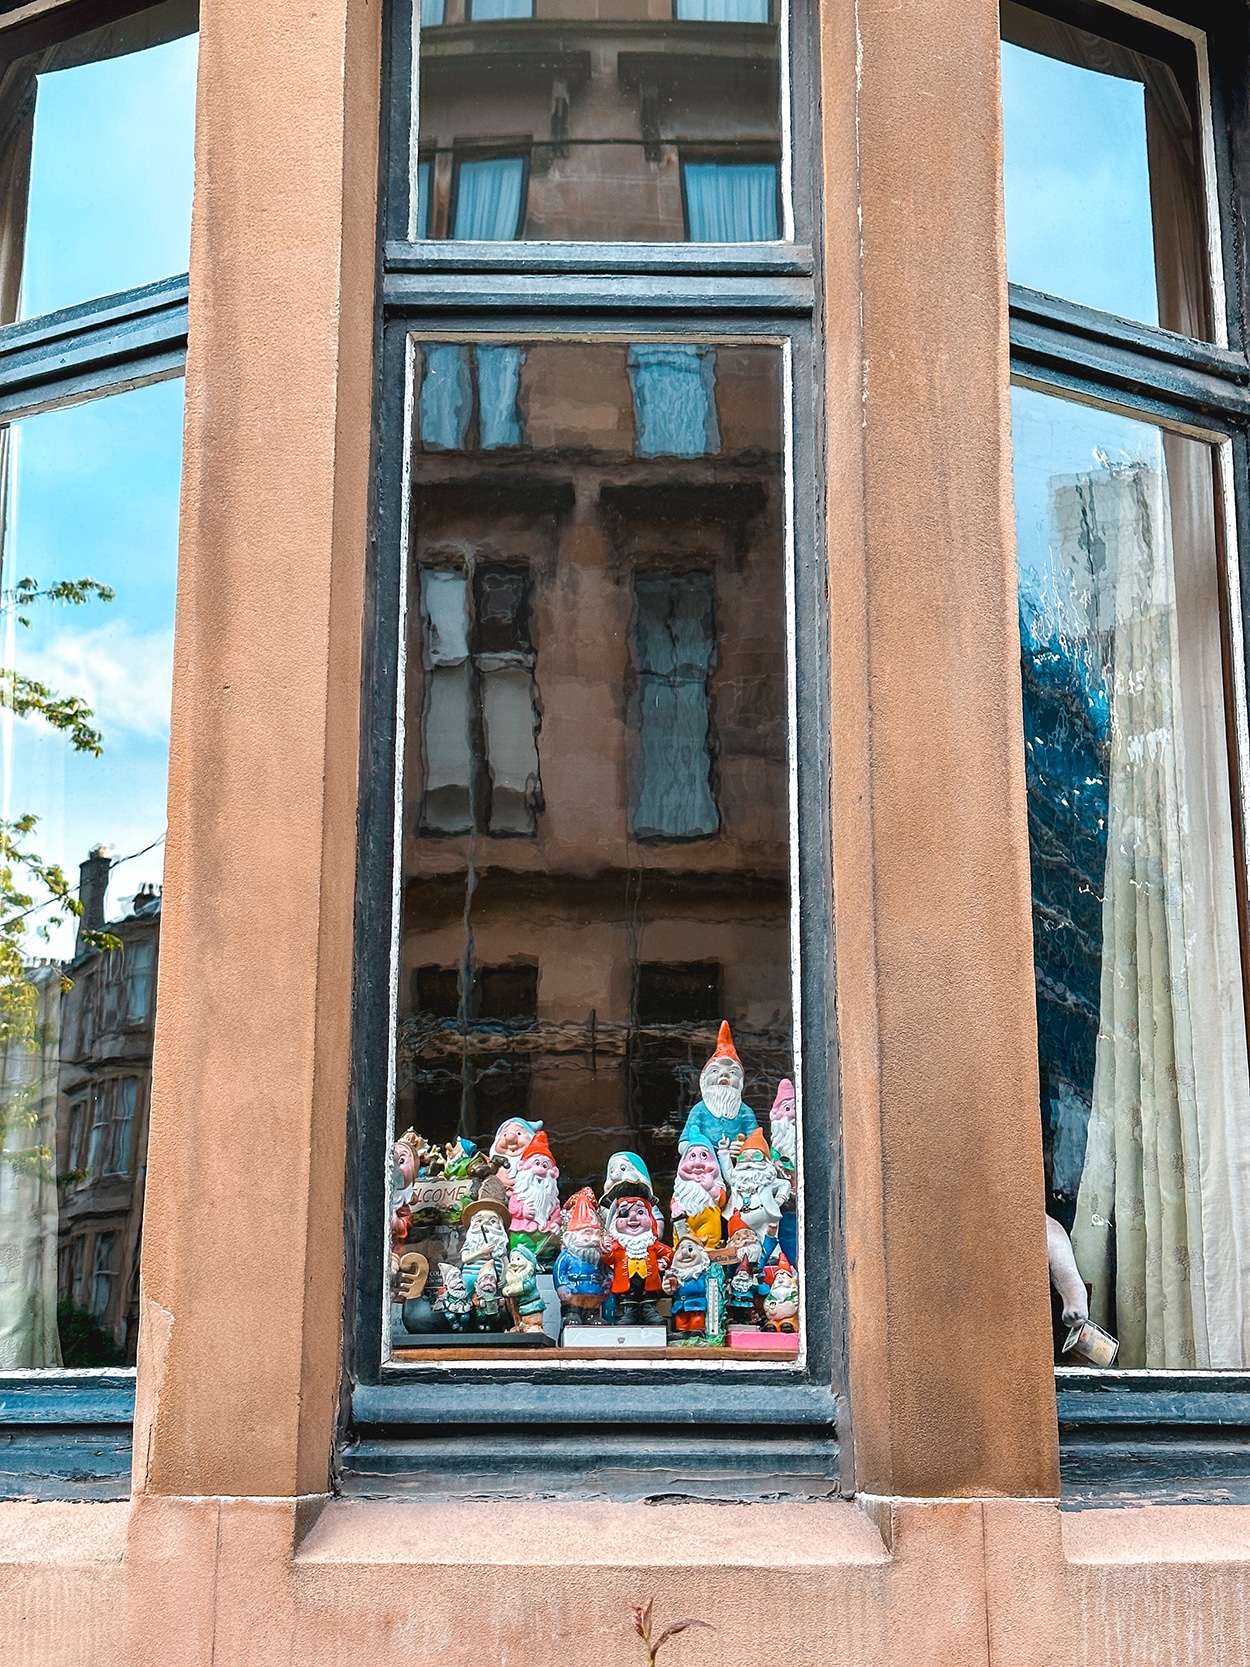 Trolls and gnomes in a window of a home in Glasgow near University of Glasgow scotland- - photo by Keryn Means editor of TwistTravelMag.com